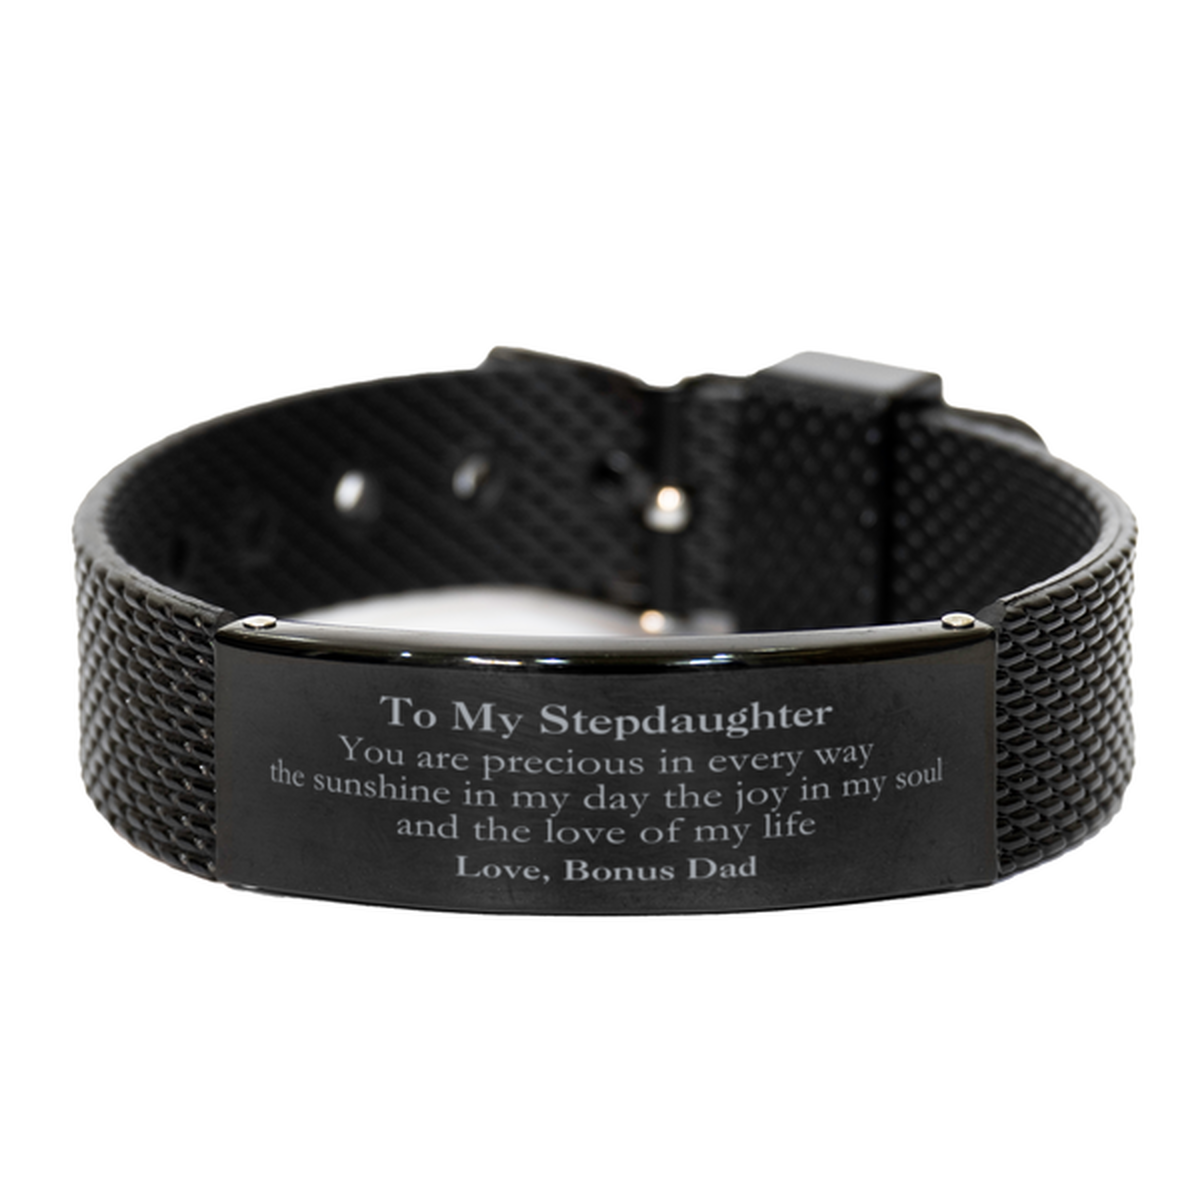 Graduation Gifts for Stepdaughter Black Shark Mesh Bracelet Present from Bonus Dad, Christmas Stepdaughter Birthday Gifts Stepdaughter You are precious in every way the sunshine in my day. Love, Bonus Dad